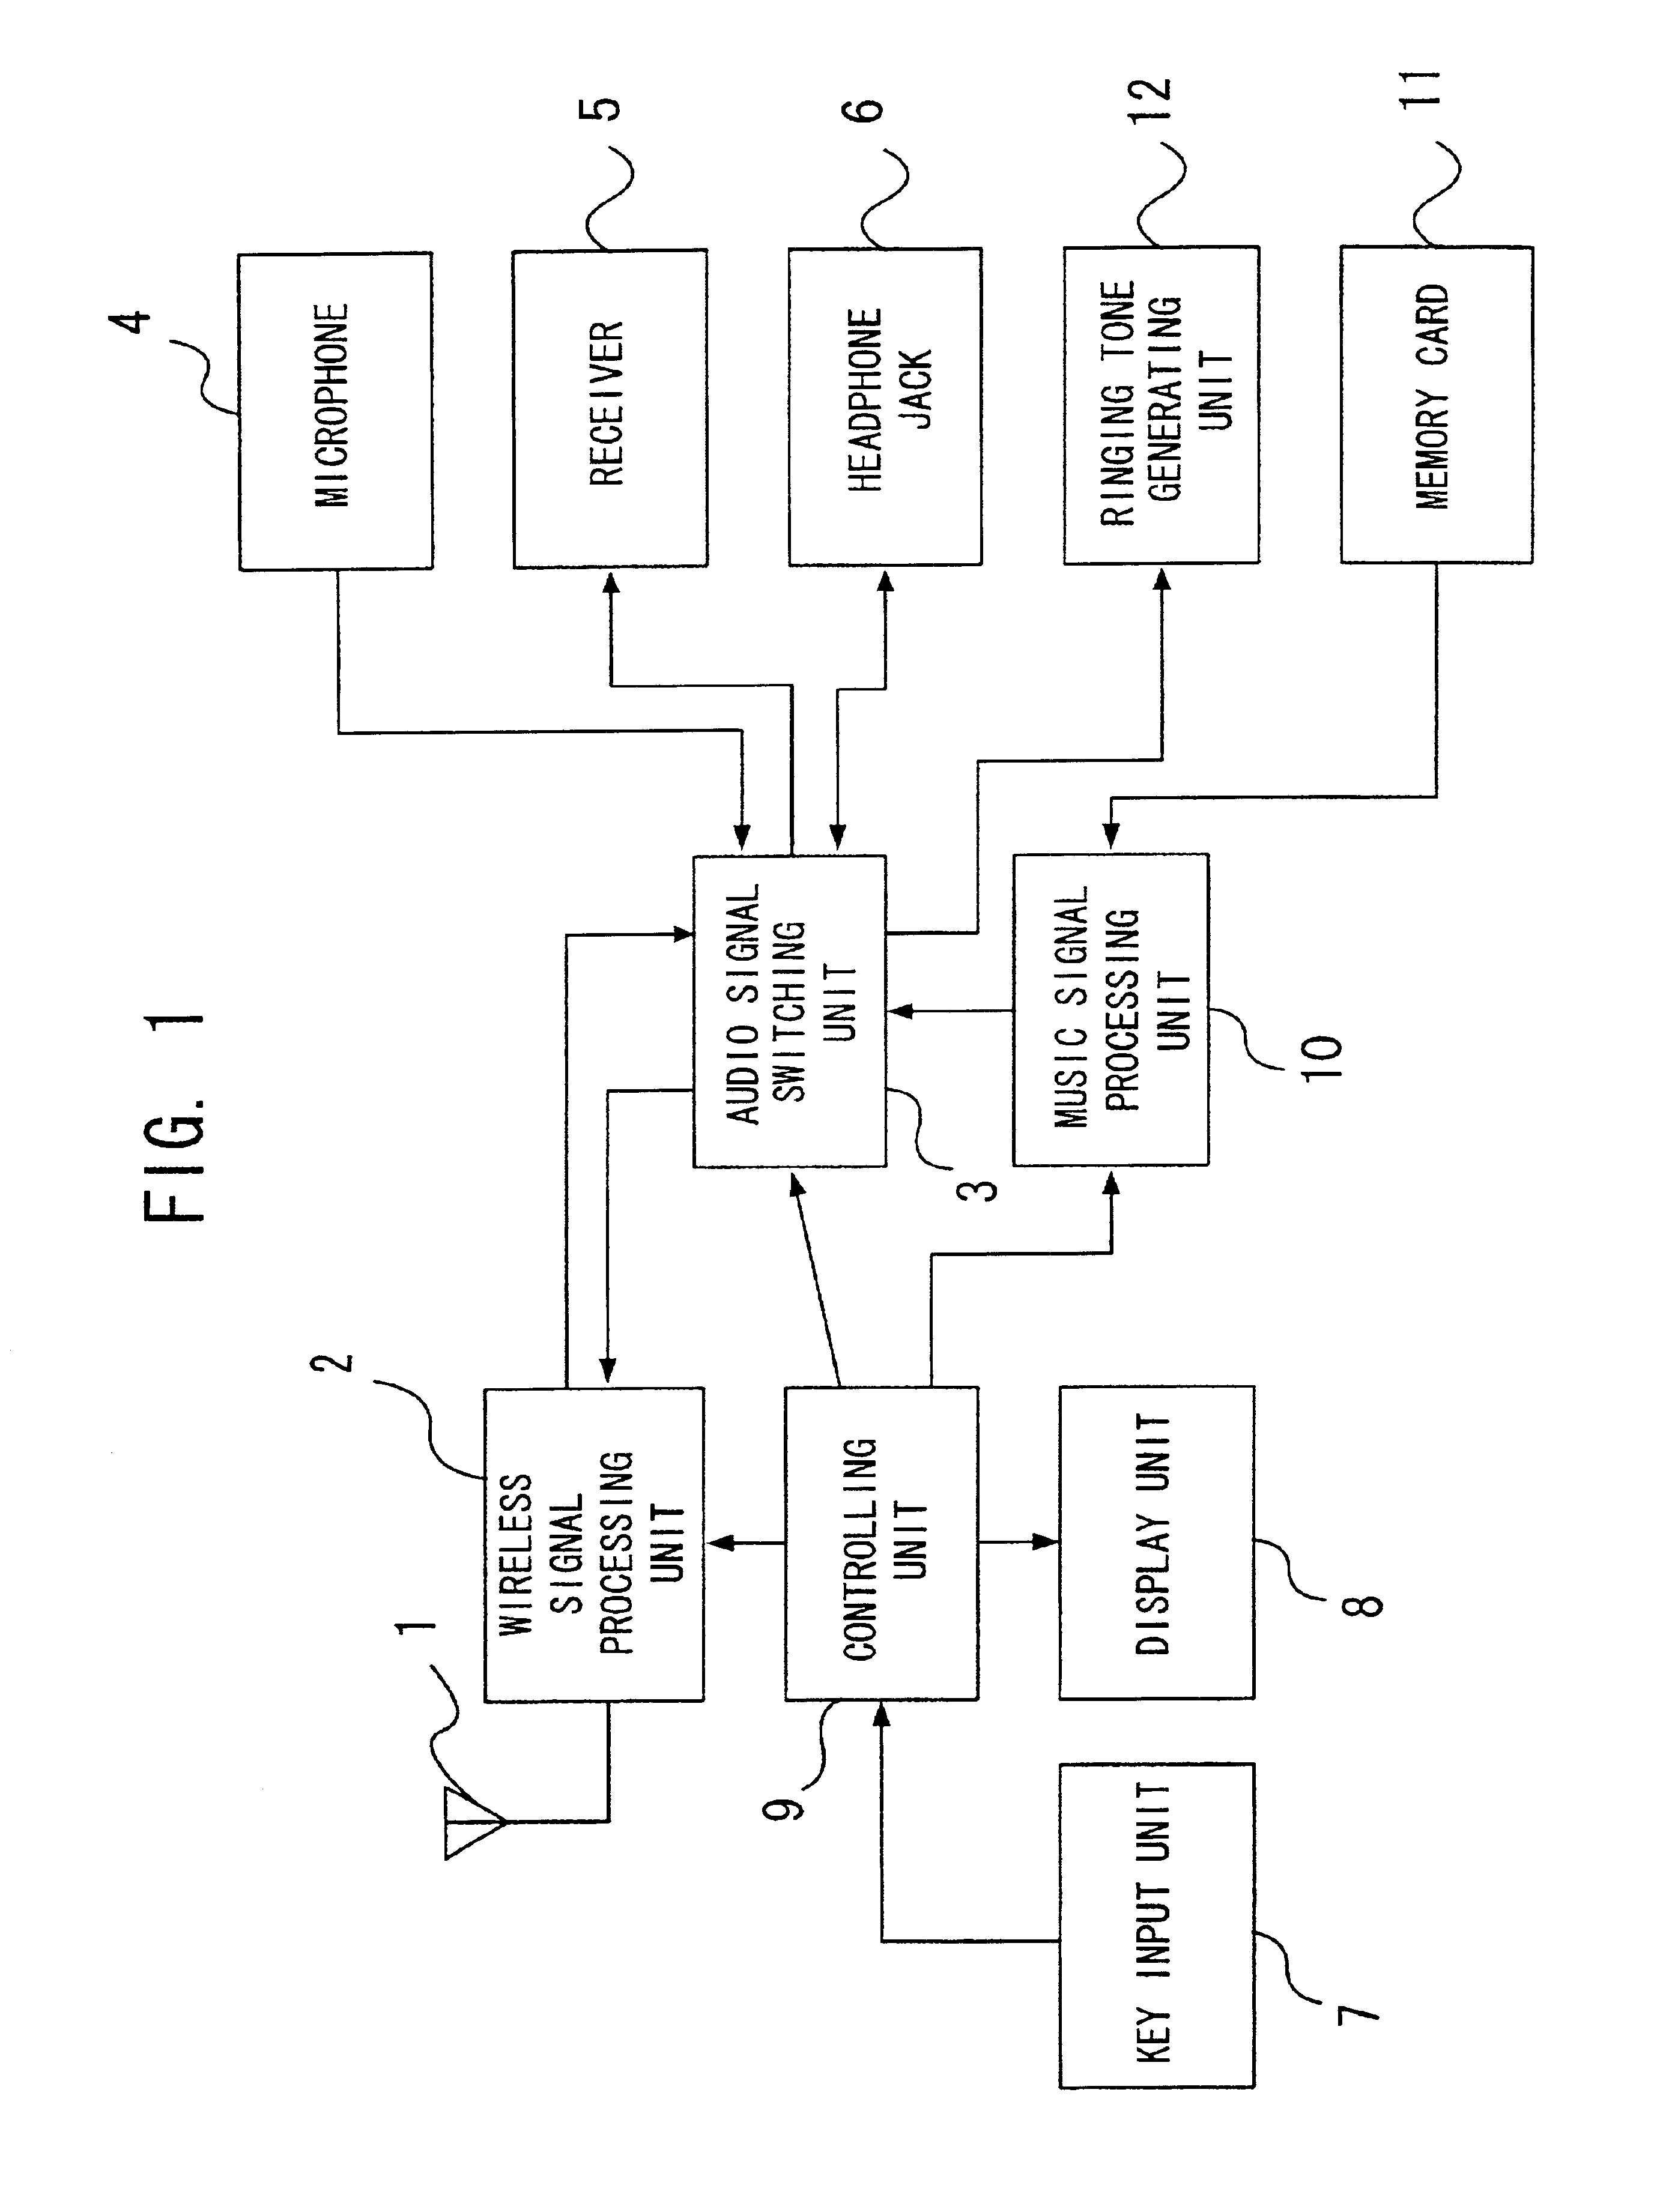 Portable wireless communication apparatus with the varied hold tone